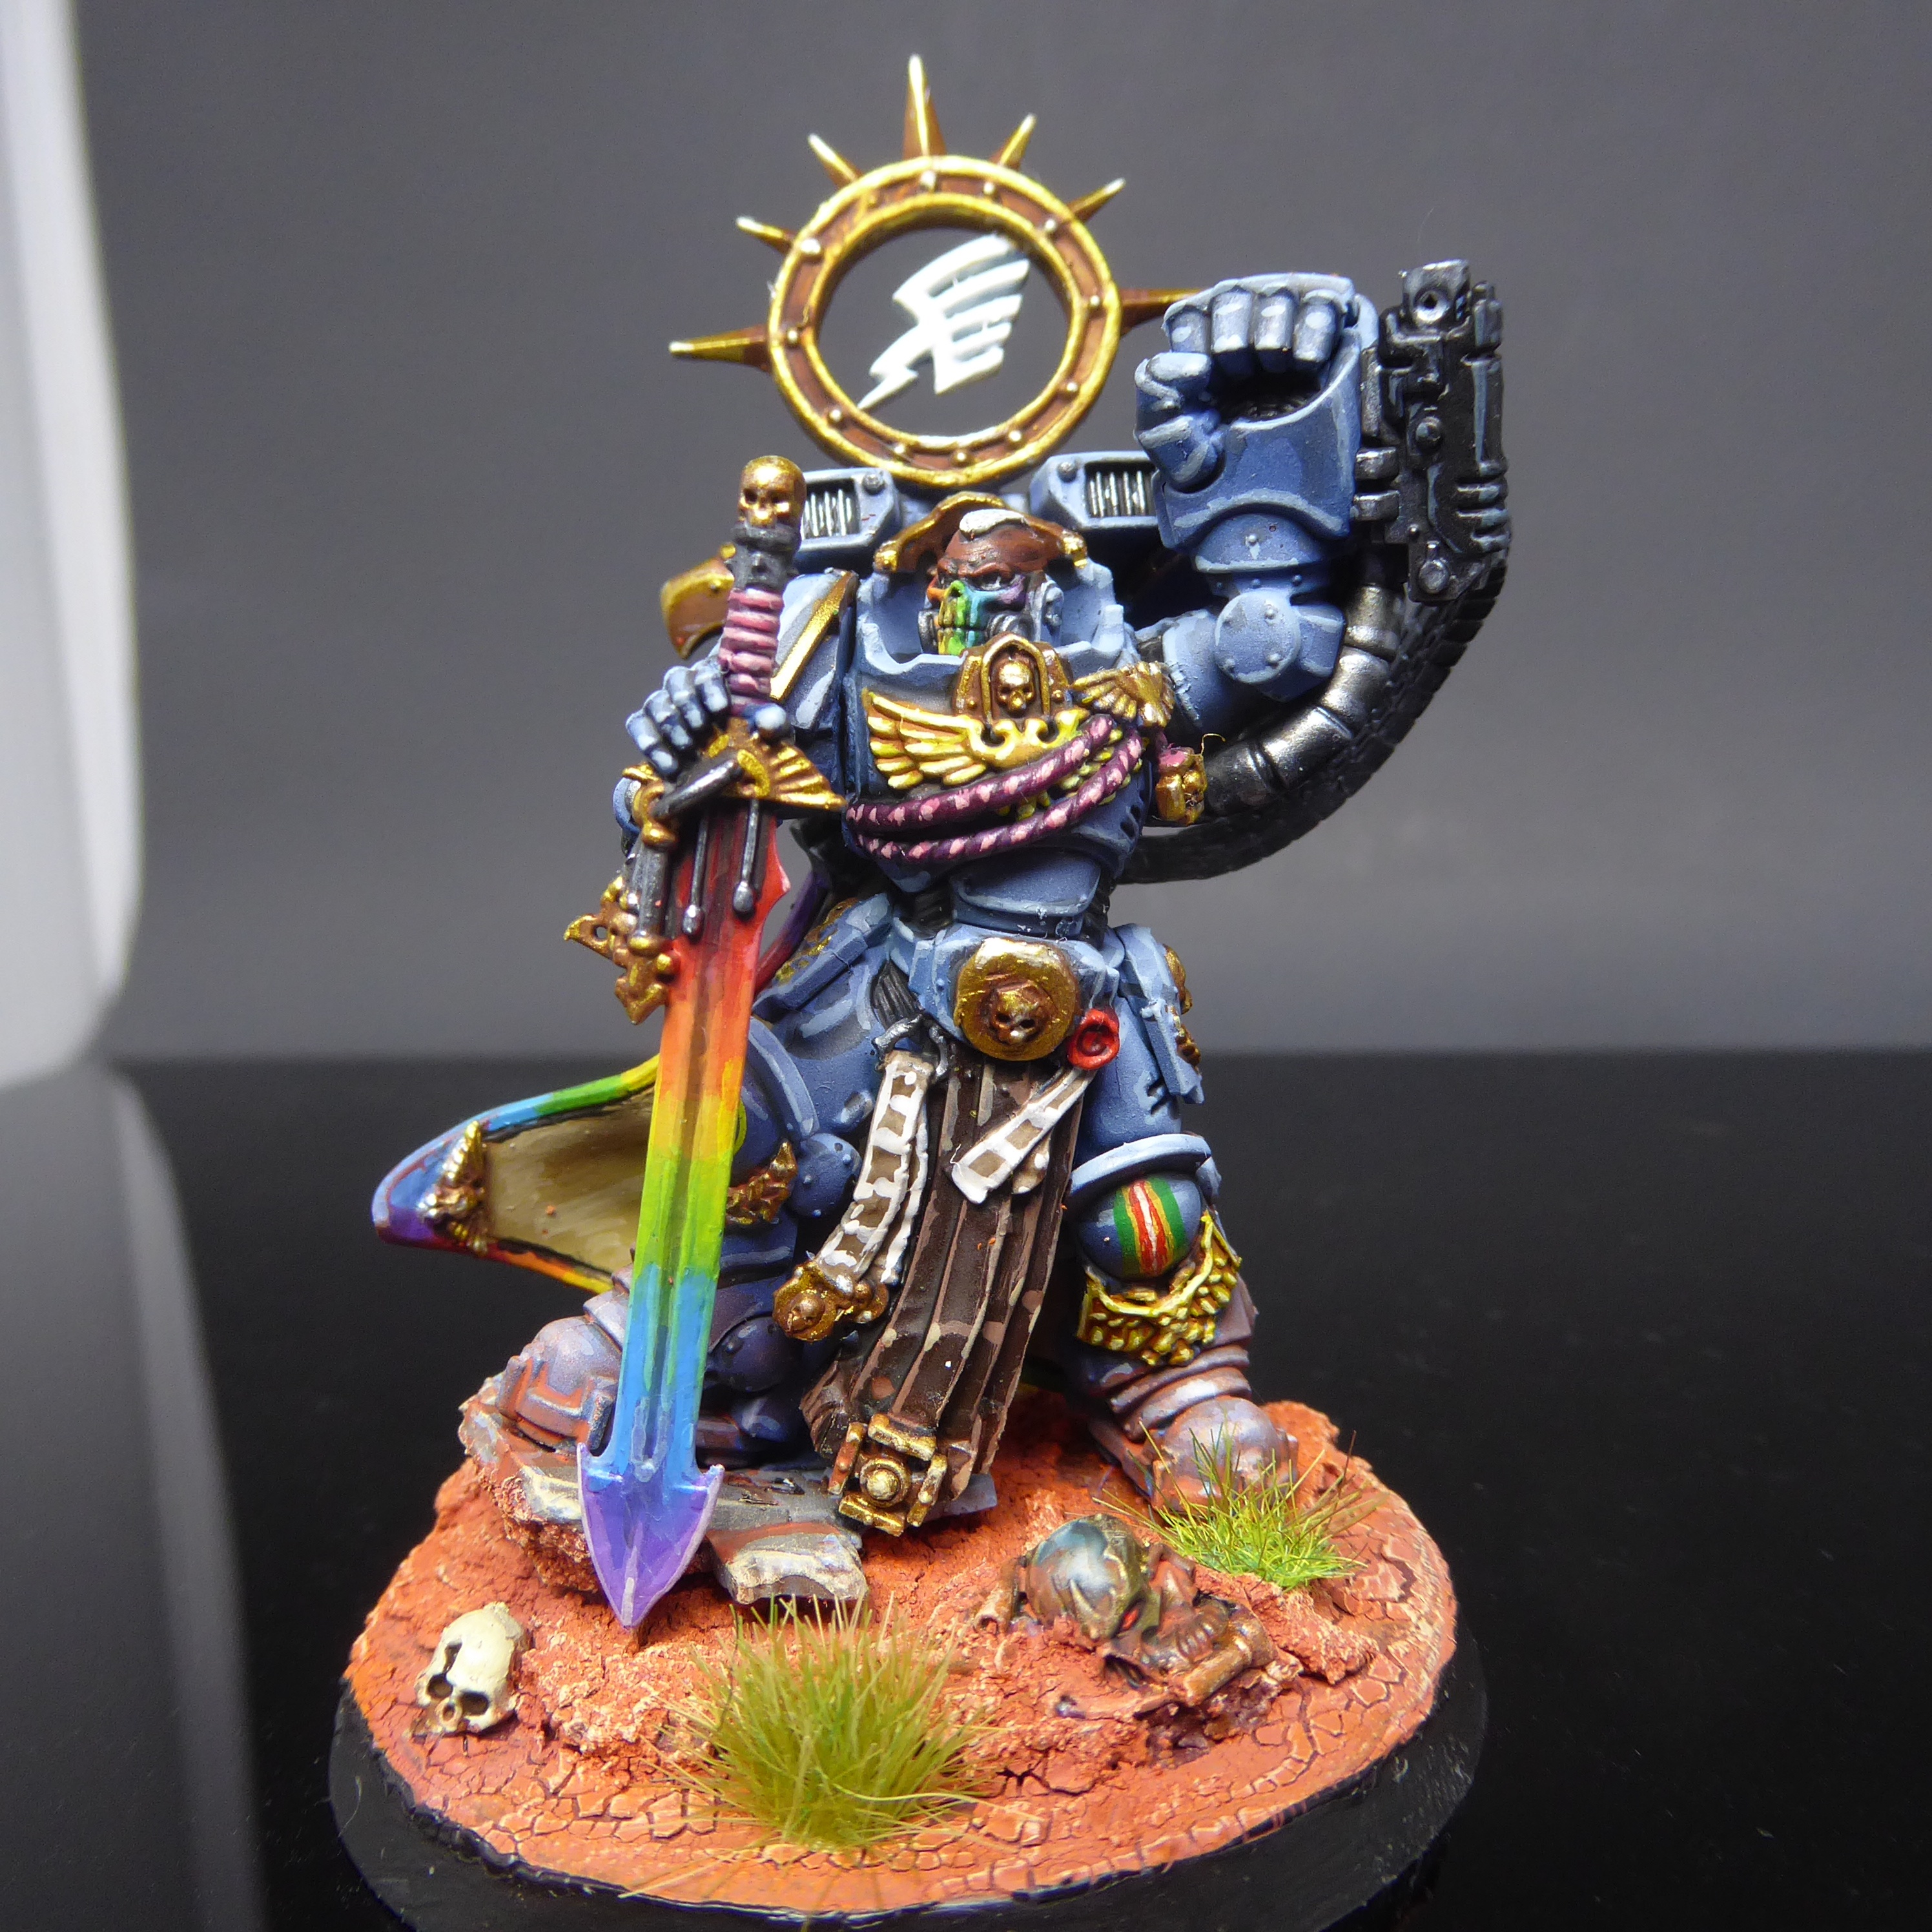 Chapter Master Arcus Pluvius of the Rainbow Warriors holding the relic sword Hue Resplendent